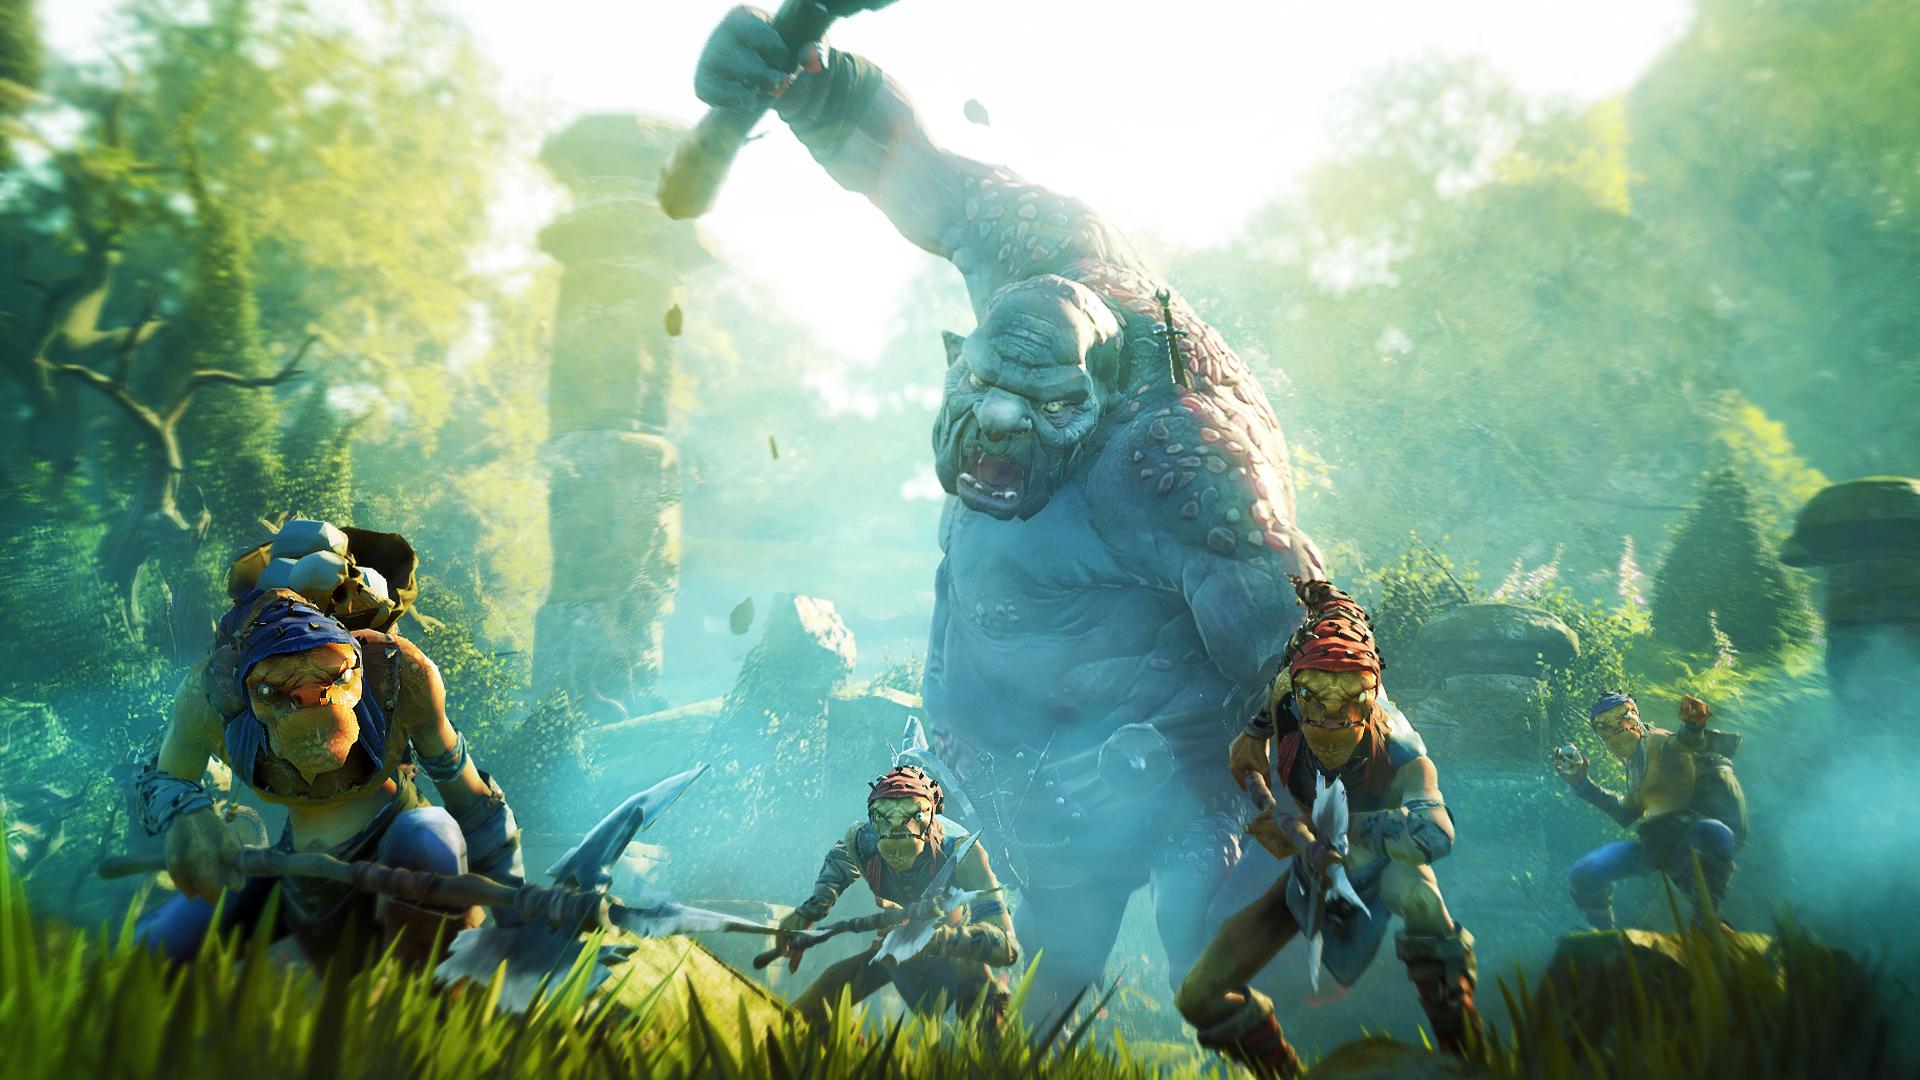 Crafting a next-gen experience for unreleased hardware is no small task, and as such Lionhead's developers count on Unreal Engine 4 to help make the most of ...